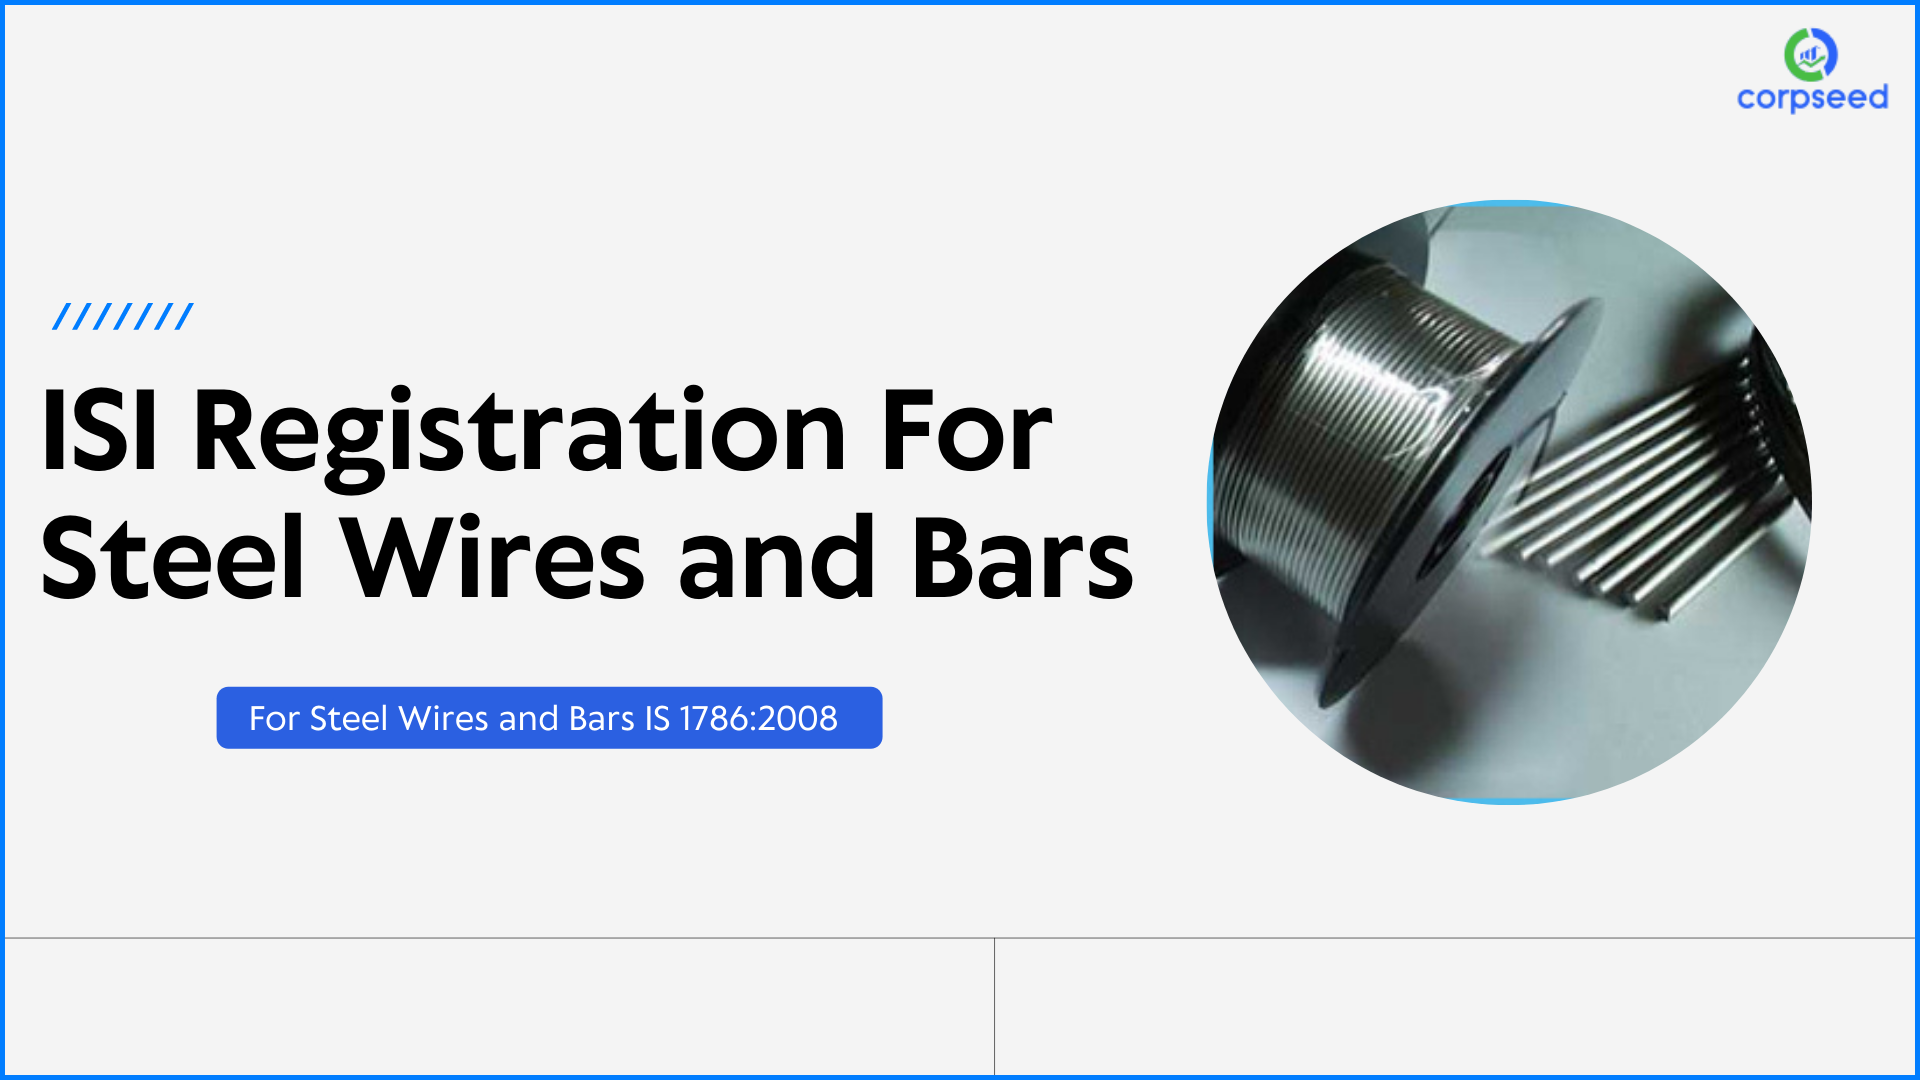 isi-registration-for-steel-wires-and-bars-is-1786-2008_corpseed.png